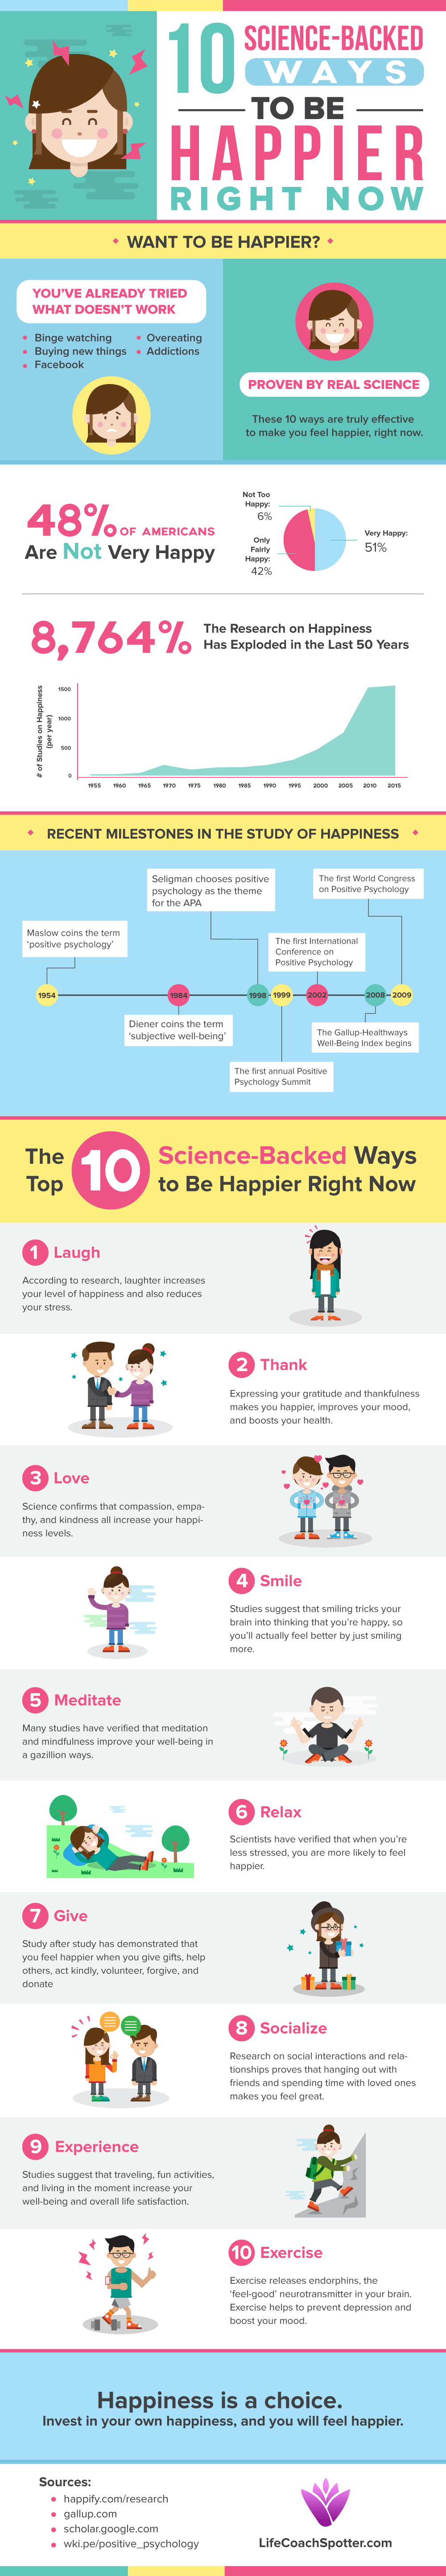 10 Science-Backed Ways to Be Happier Right Now